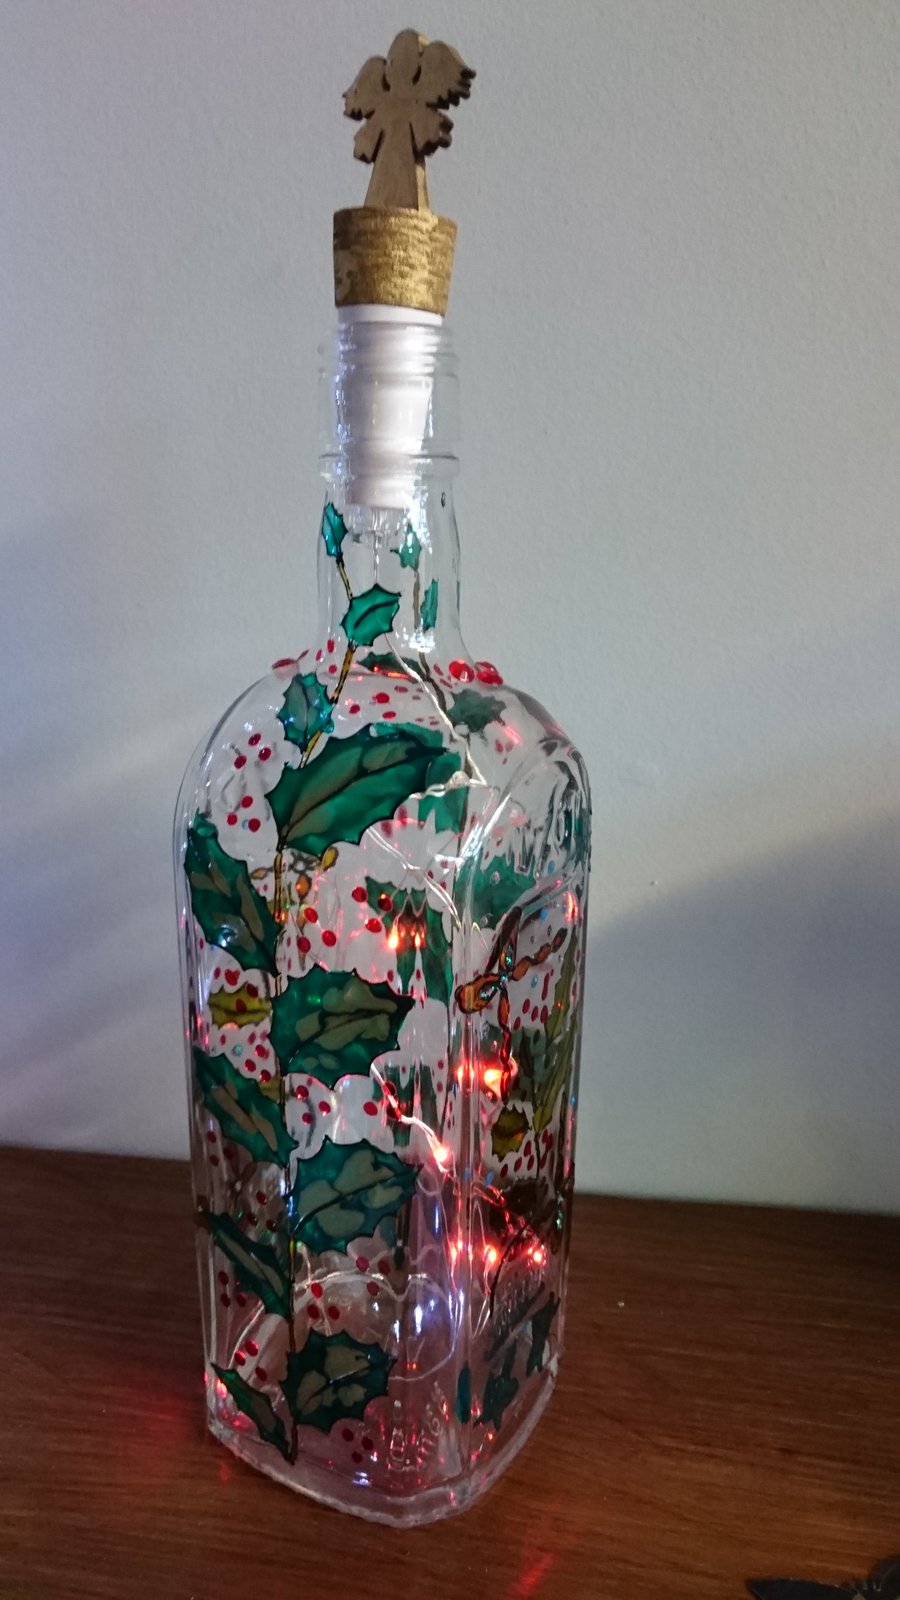 Holly and Ivy - Handpainted Bottle Light